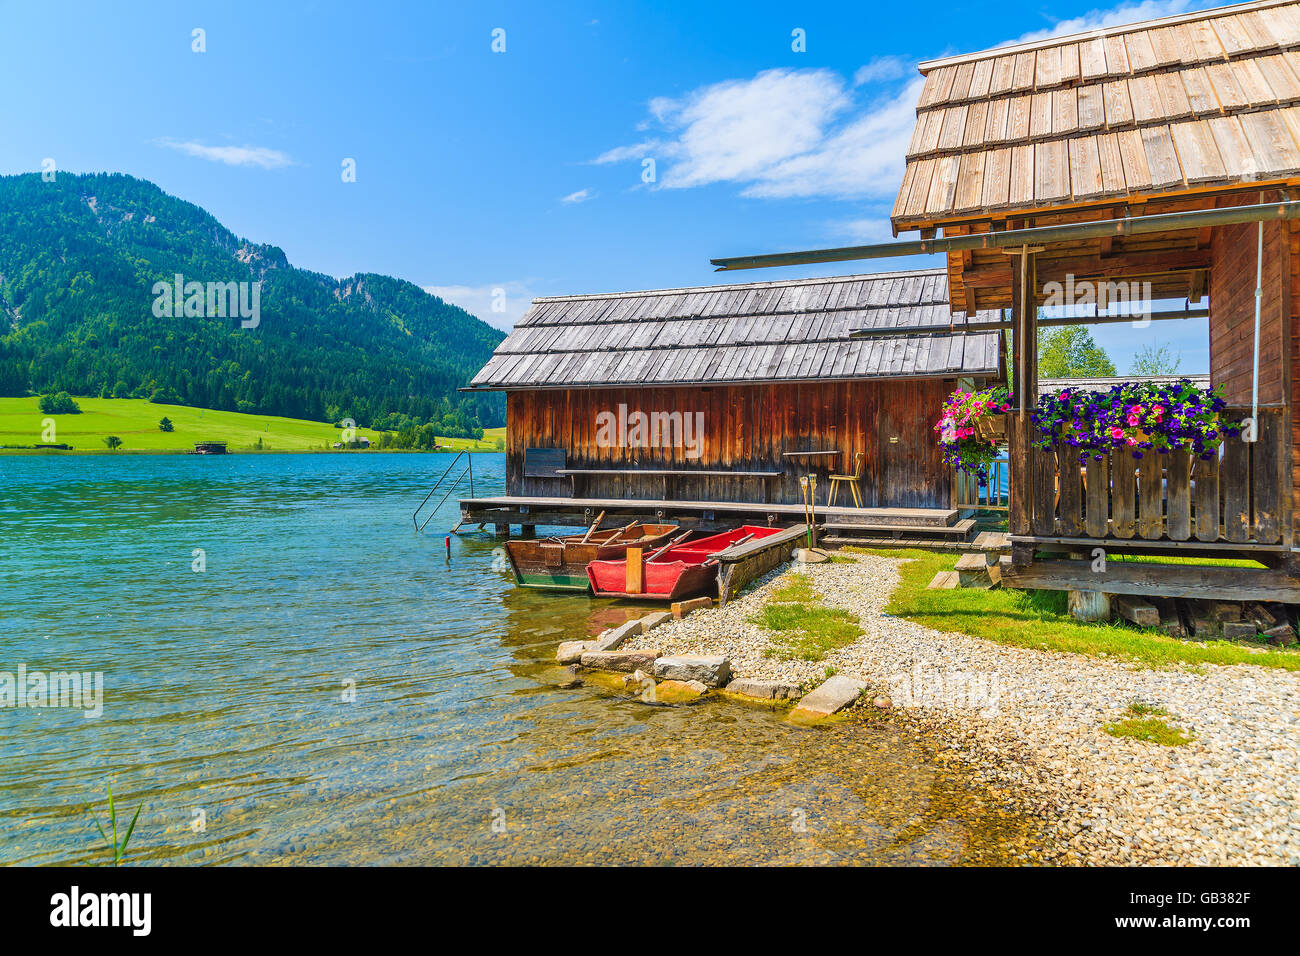 Fishing boats and wooden houses on shore of Weissensee lake in summer landscape of Carinthia land, Austria Stock Photo